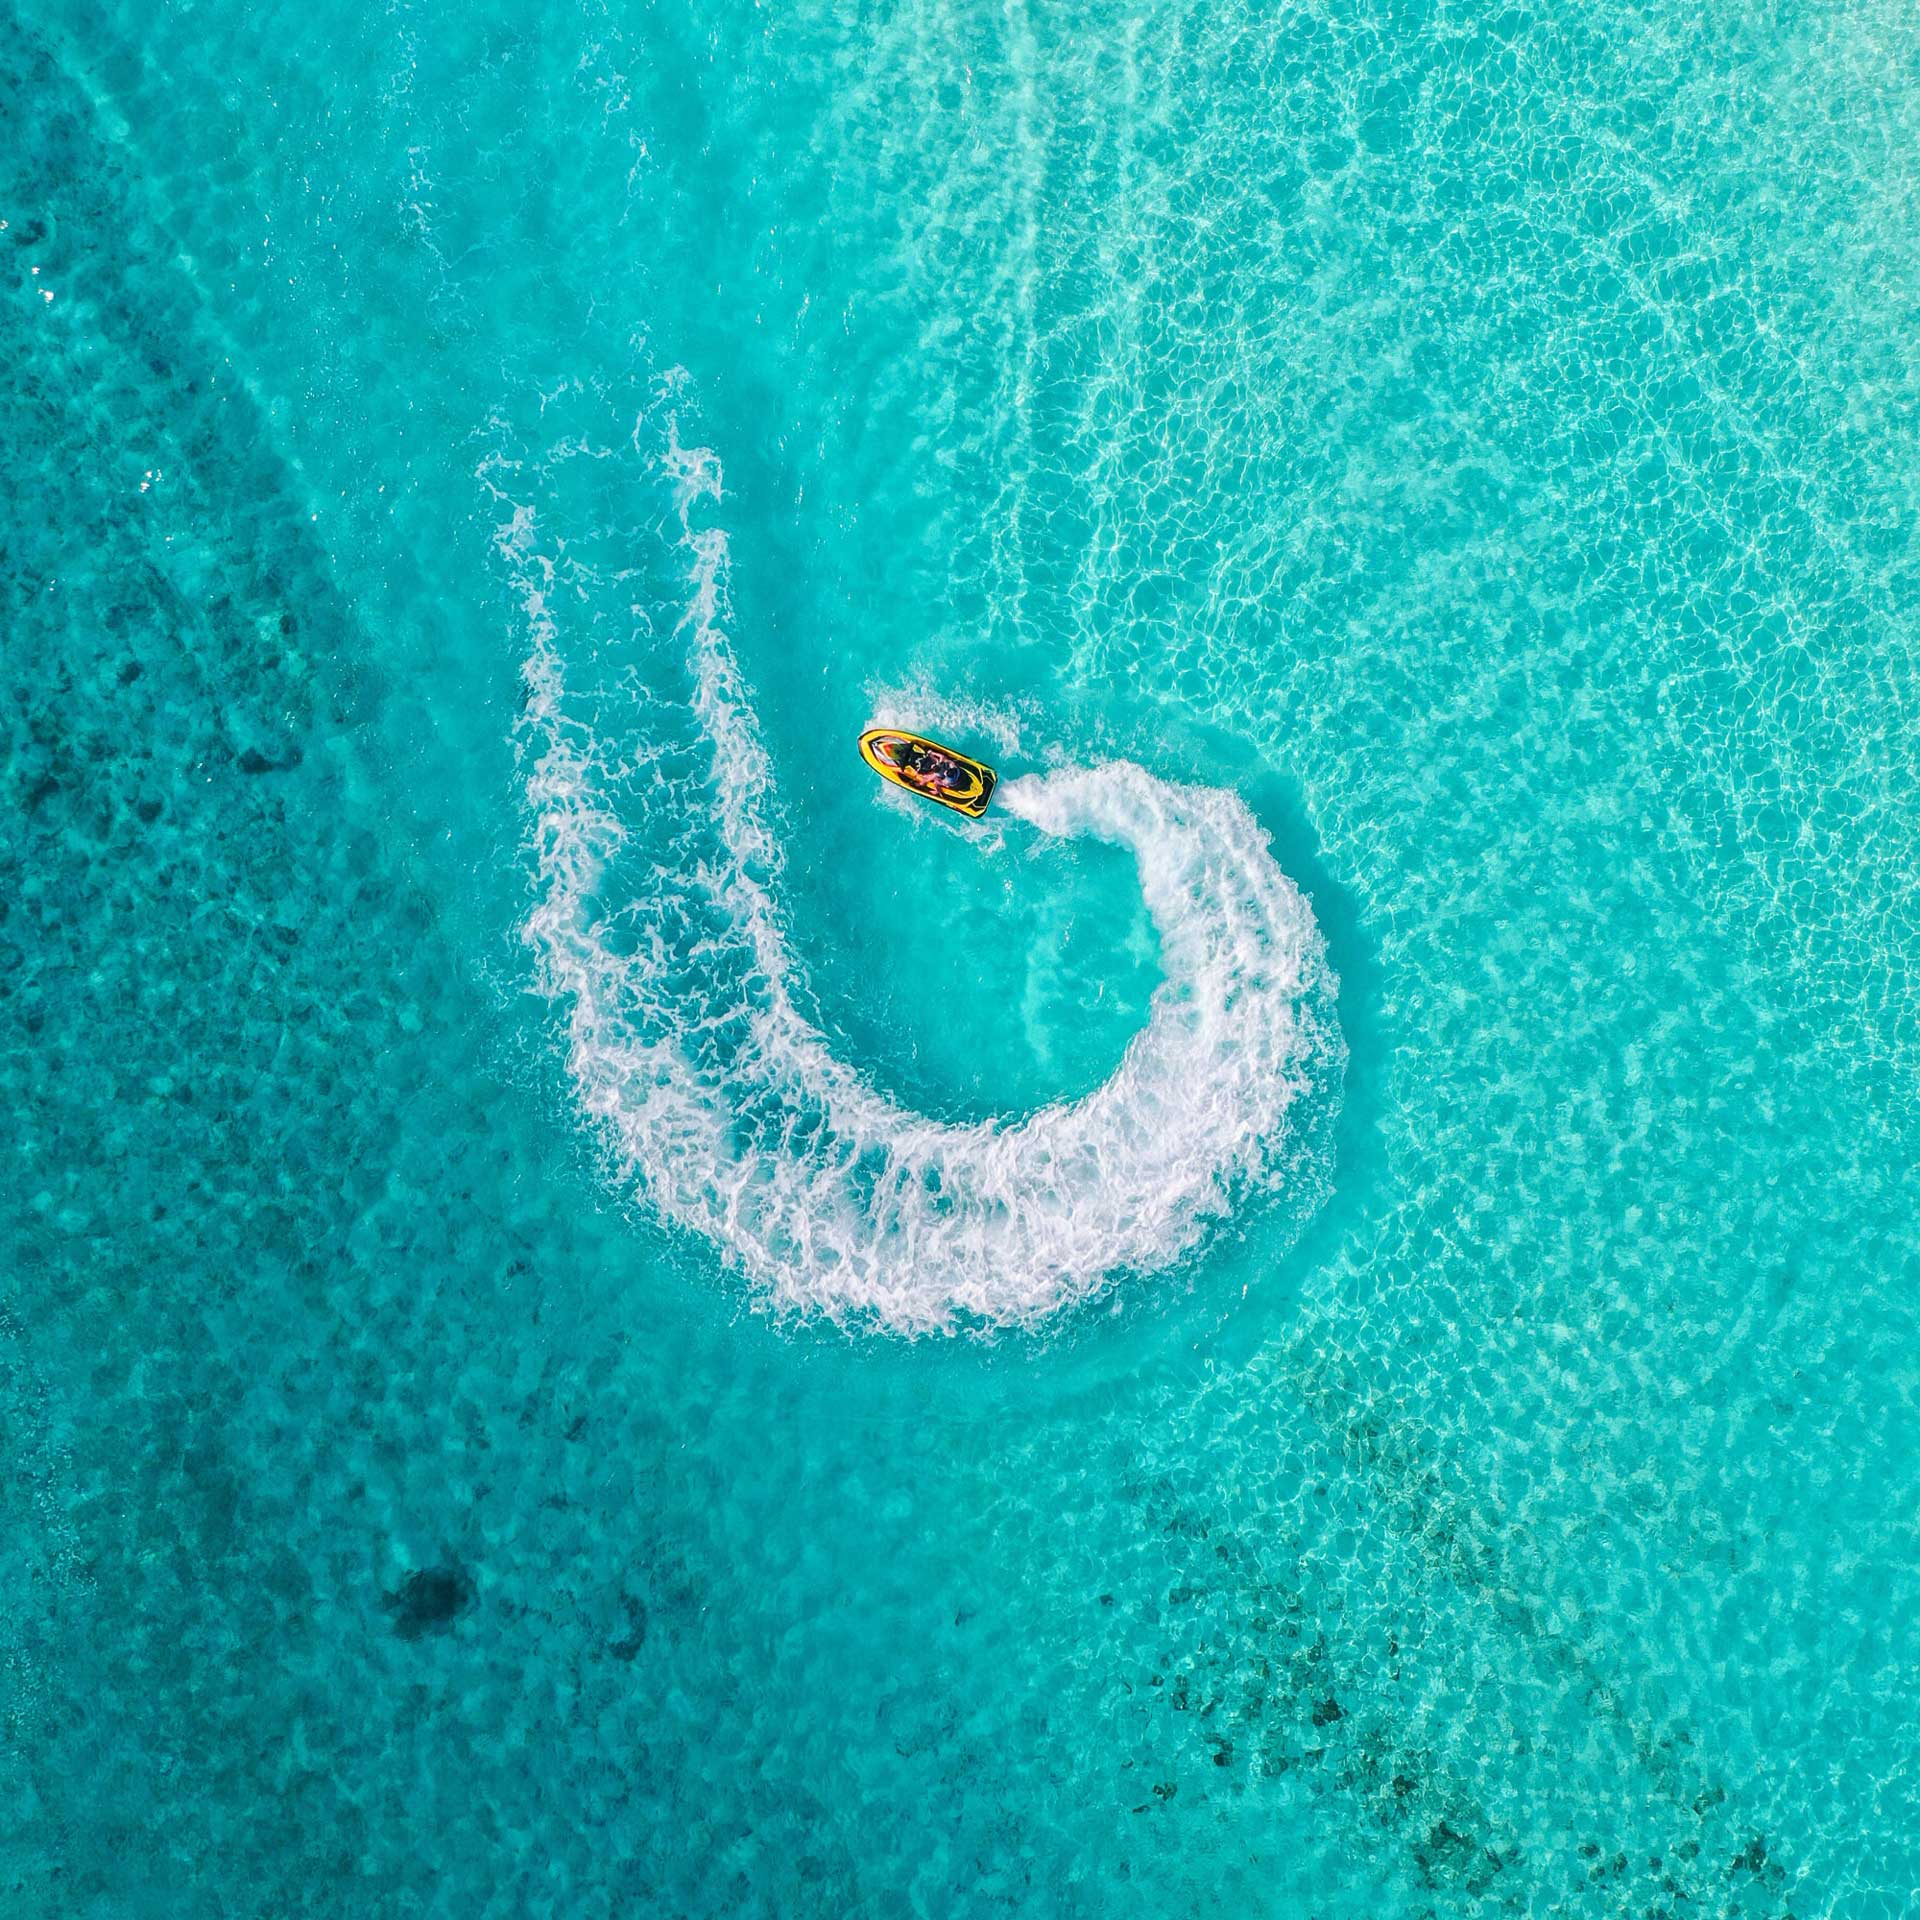 Overview of a Jet Ski in the ocean